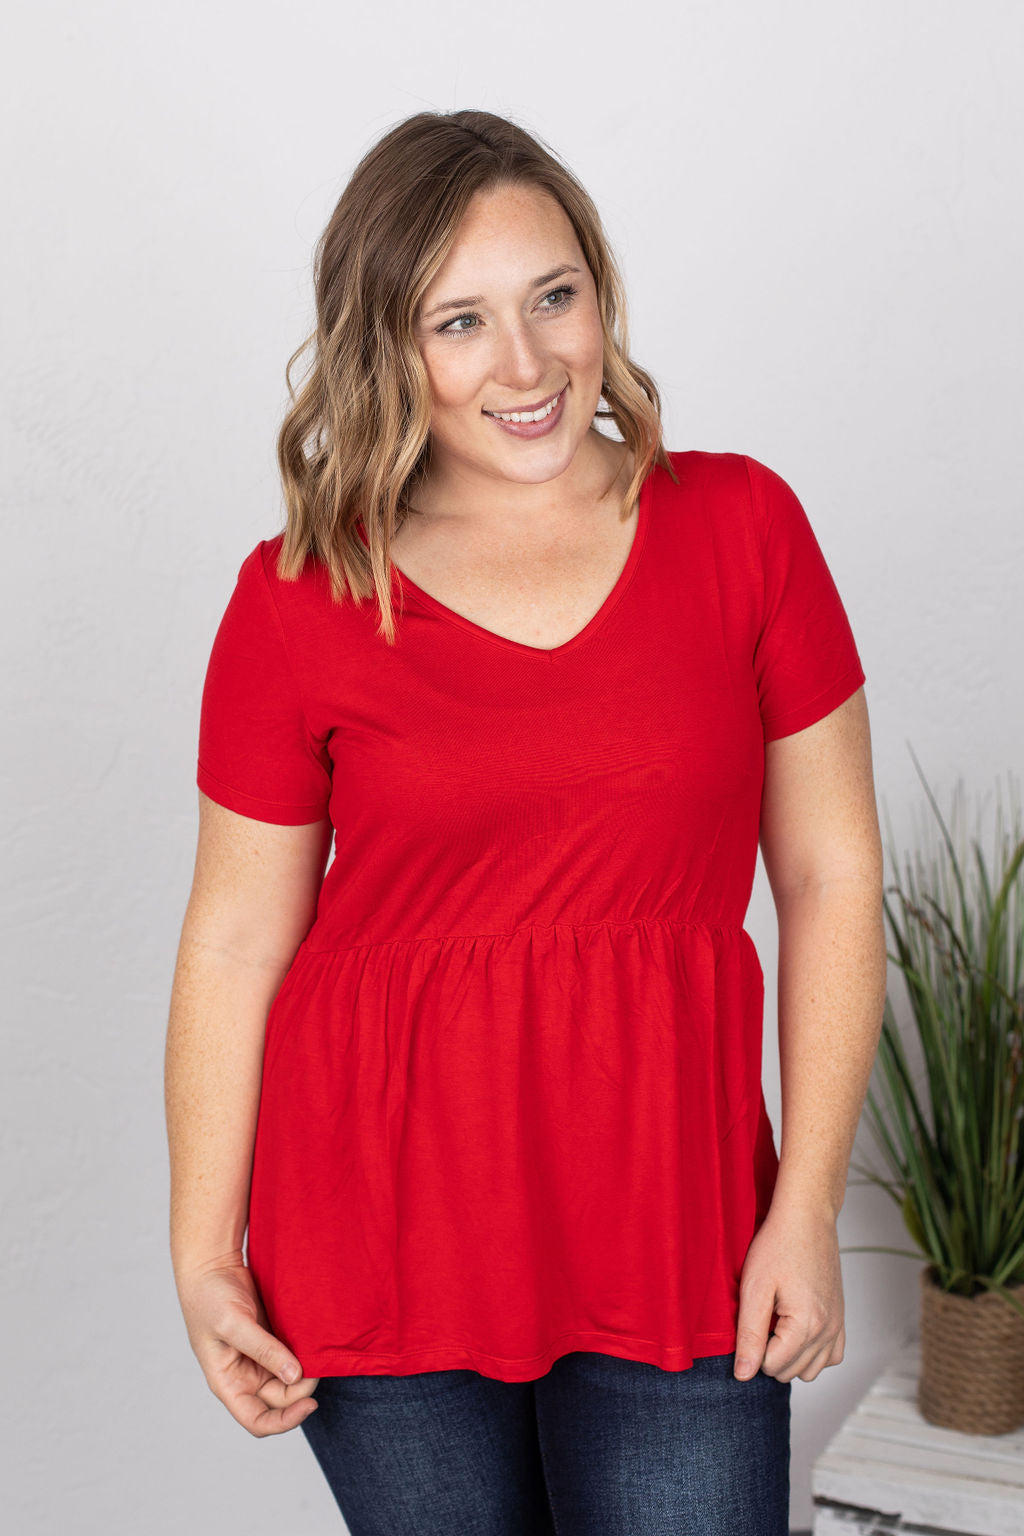 Sarah Ruffle Top - Red - AnnRose Boutique